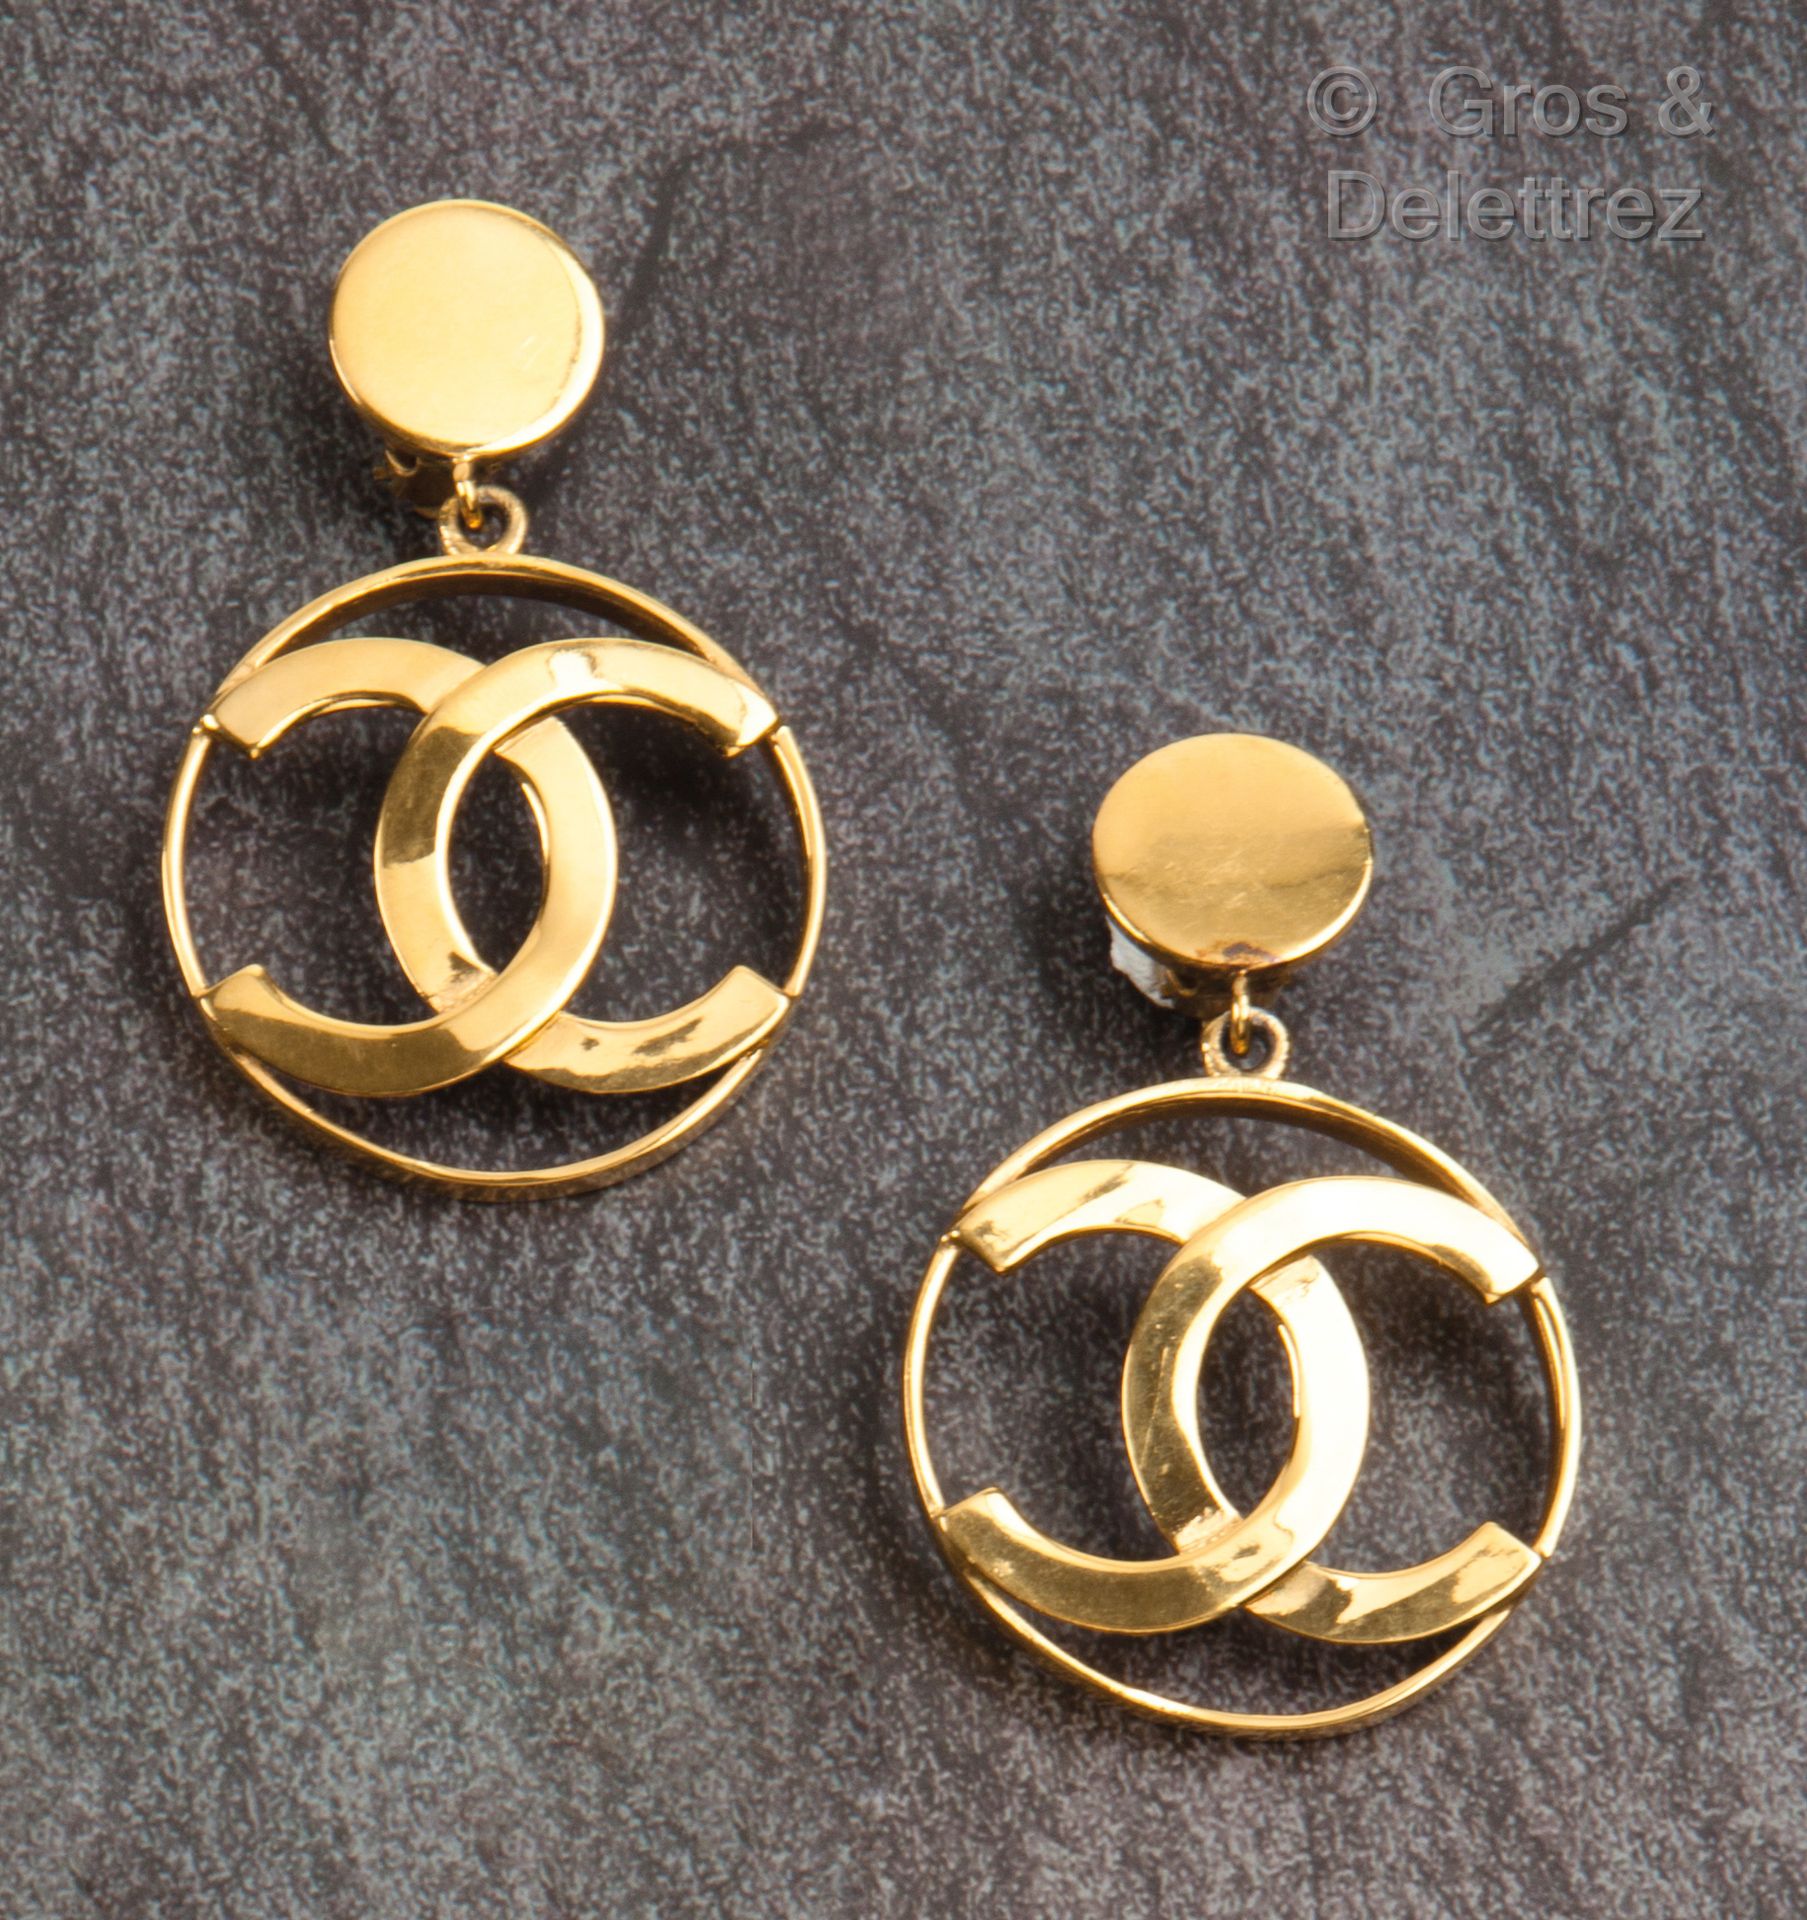 9ct gold chanel earrings vintage